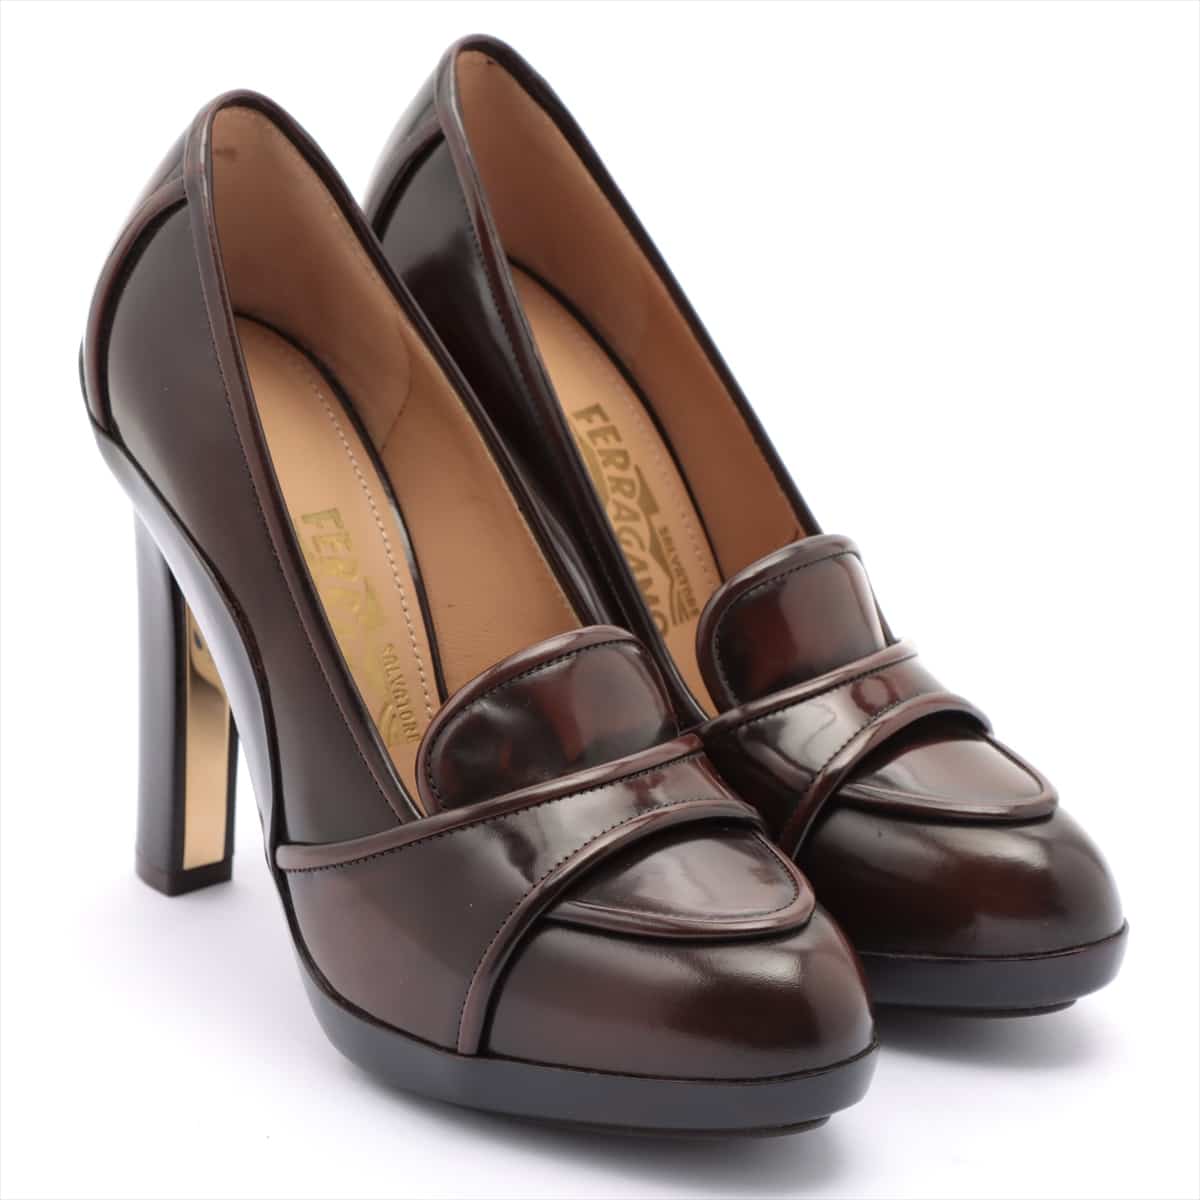 Ferragamo Patent leather Pumps 6.5 Ladies' Brown The metal fitting on the left heel is about to come off.